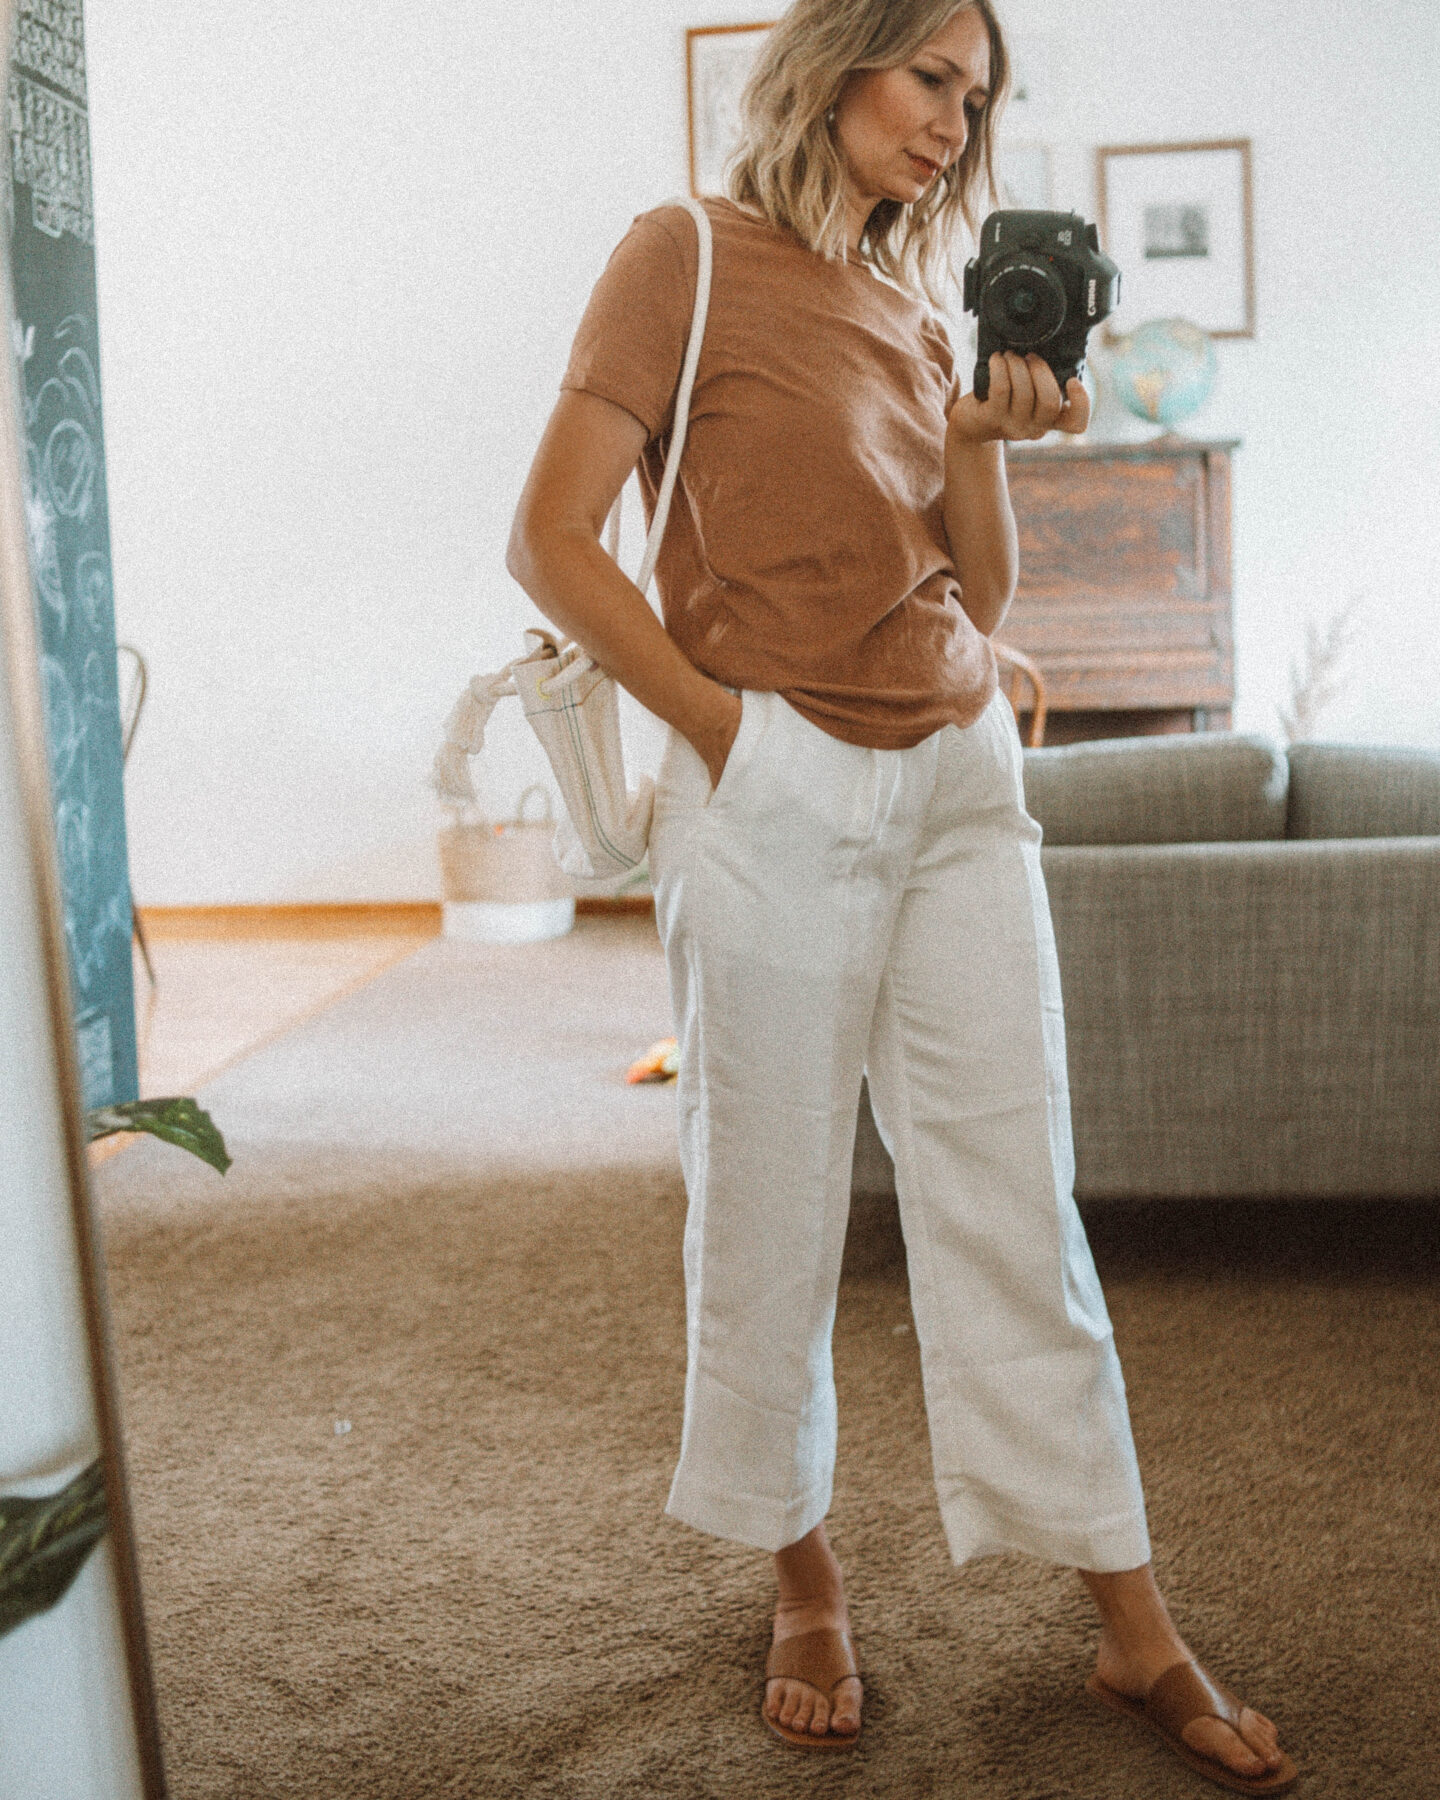 A Week of Outfits: Casual, Stylish Outfits for Real Life. caramel colored tee, madewell canvas bag, j. crew pleat white pants, everlane thong sandals, pyne & smith model no. 26